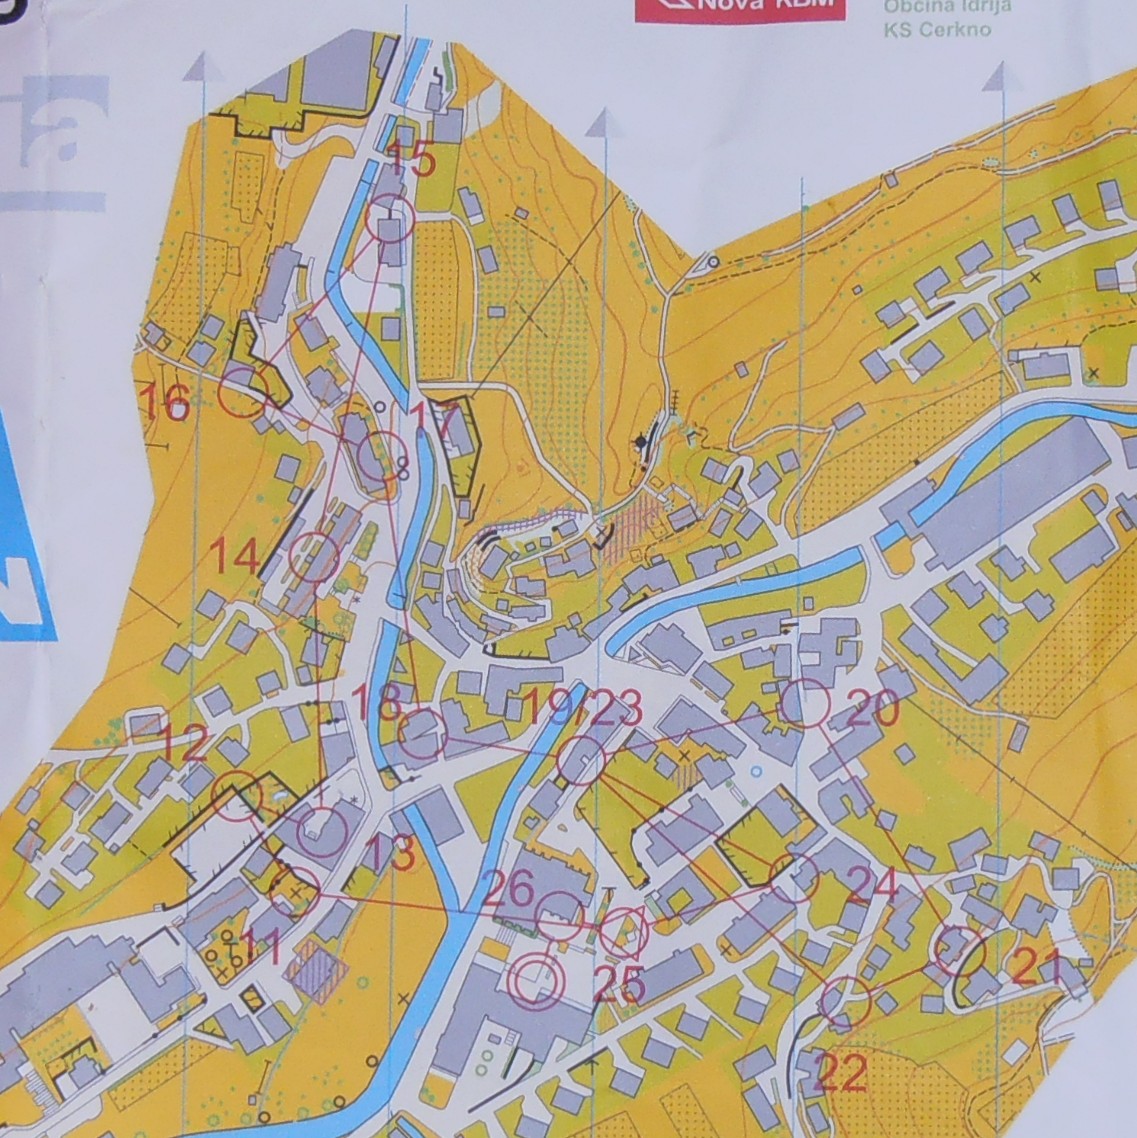 Cerkno Cup Sprint Map2 (18-08-2012)